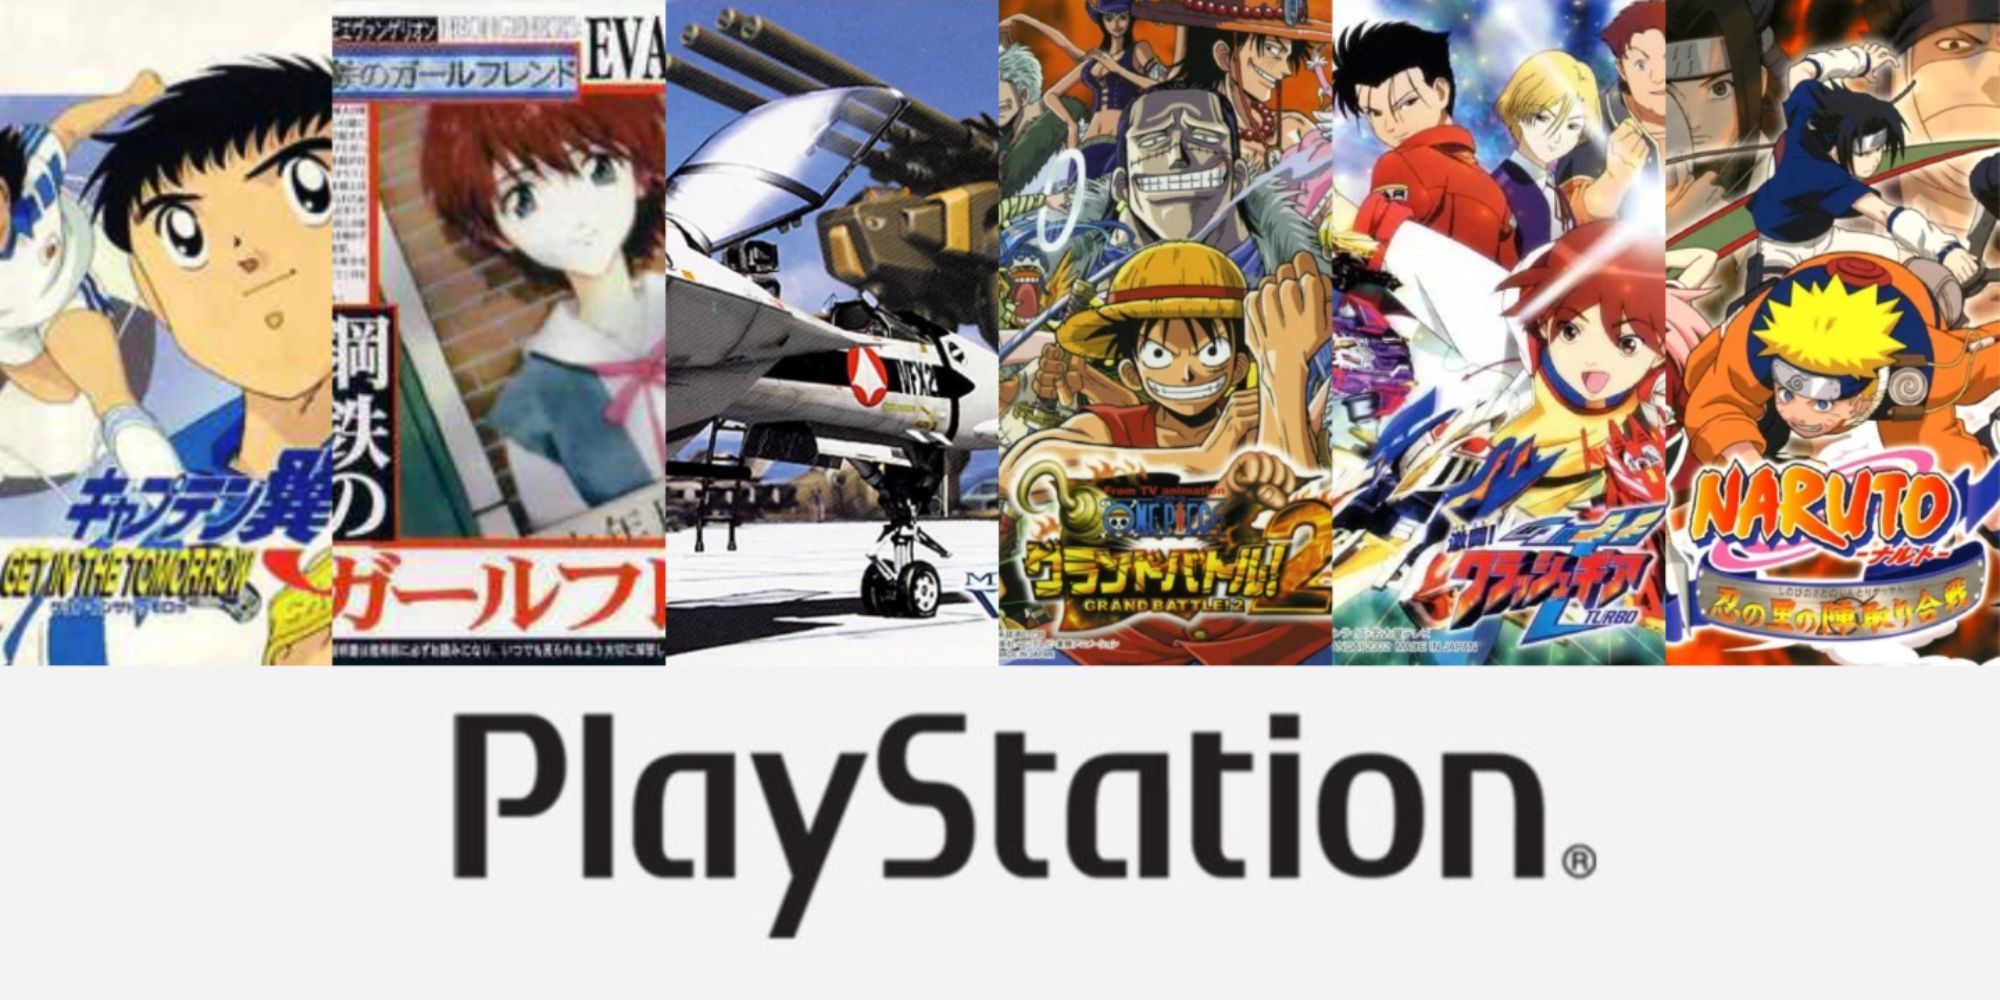 Top 51 Best PlayStation (PS1) Games, by Nao Yoshida